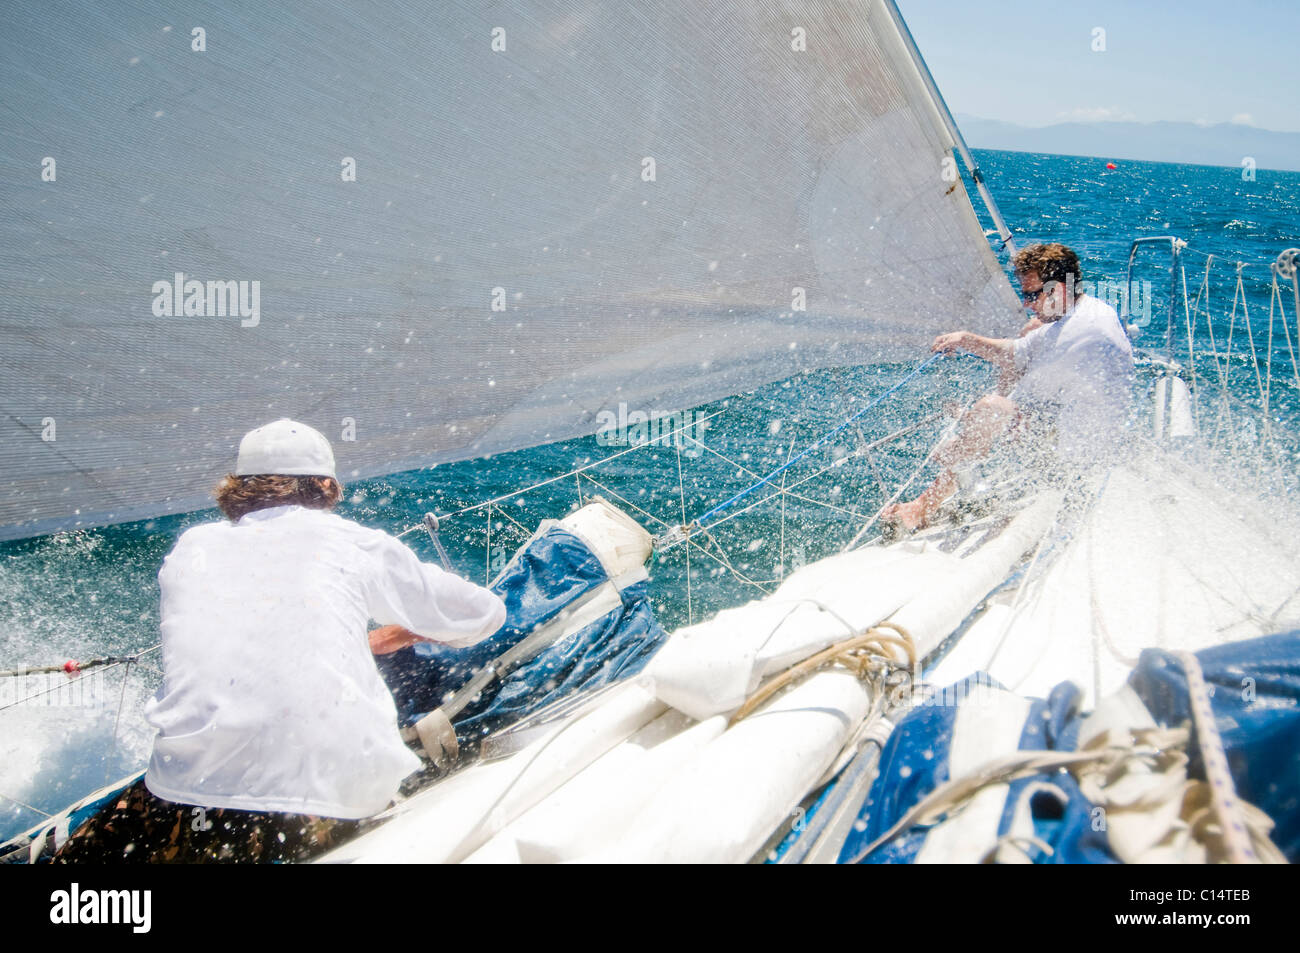 Two sailors preparing a sail during a race Stock Photo